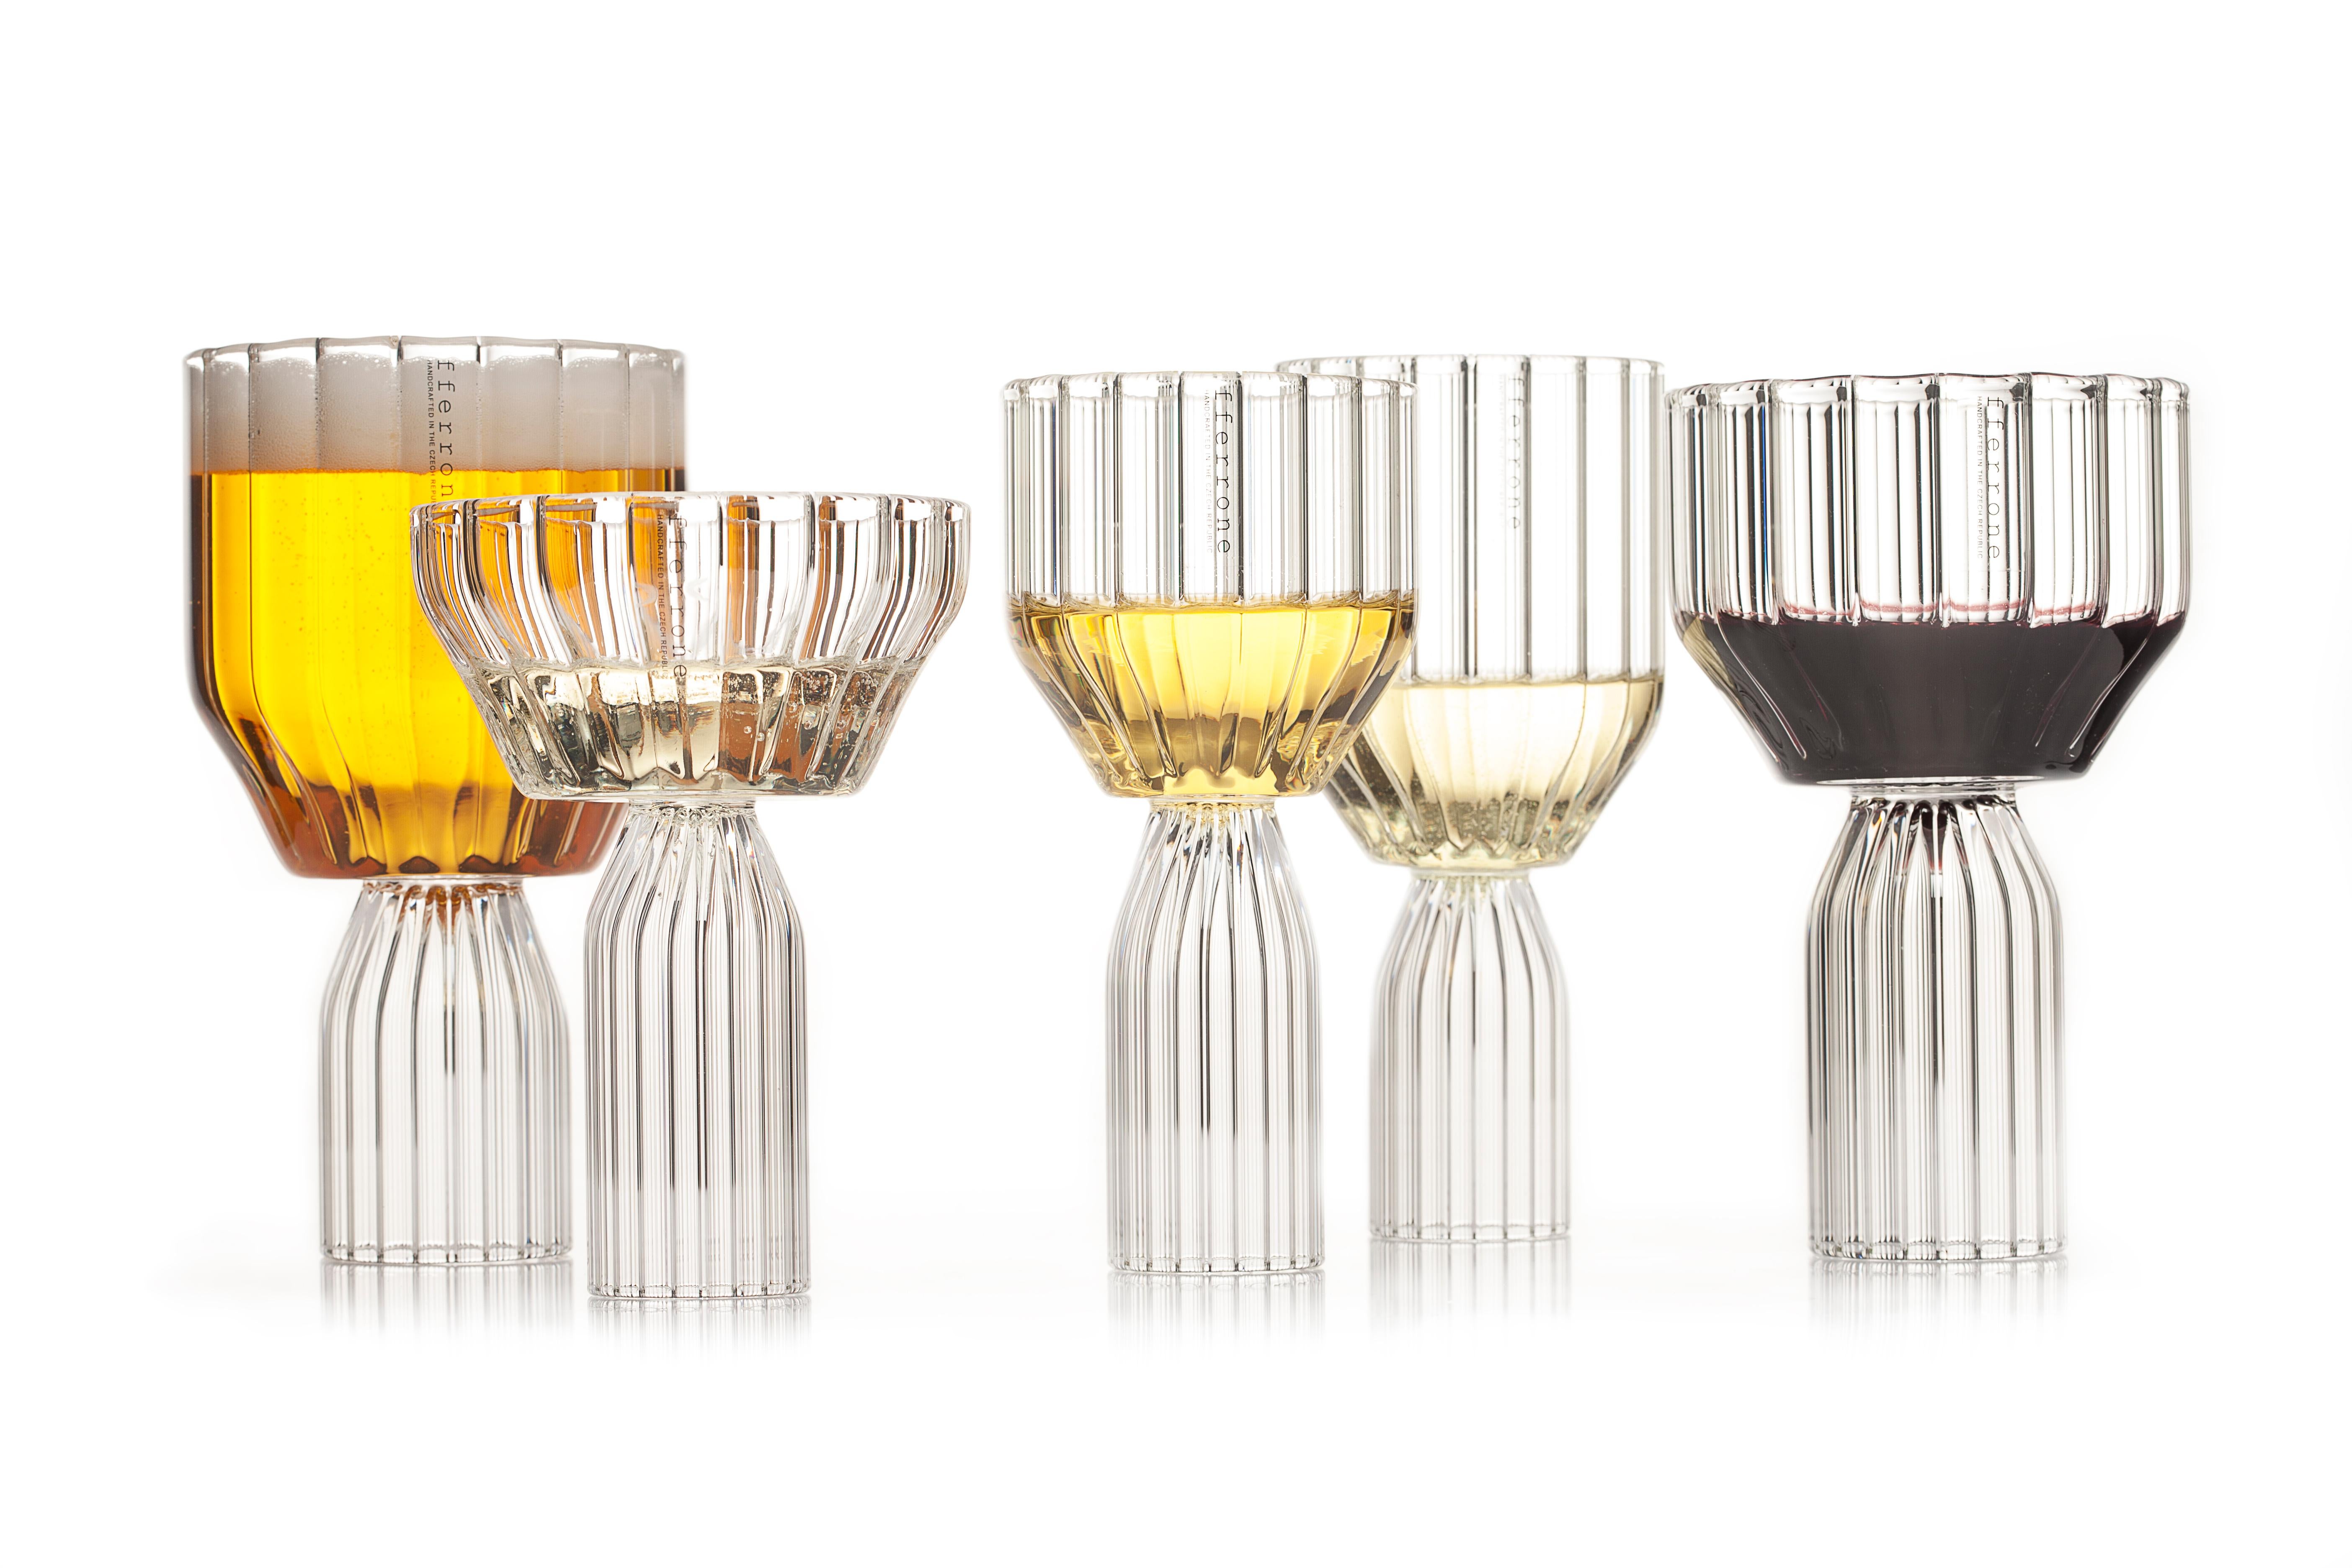 Hand-Crafted EU Clients Pair of Czech Contemporary Goblet Wine Cocktail Glasses in Stock